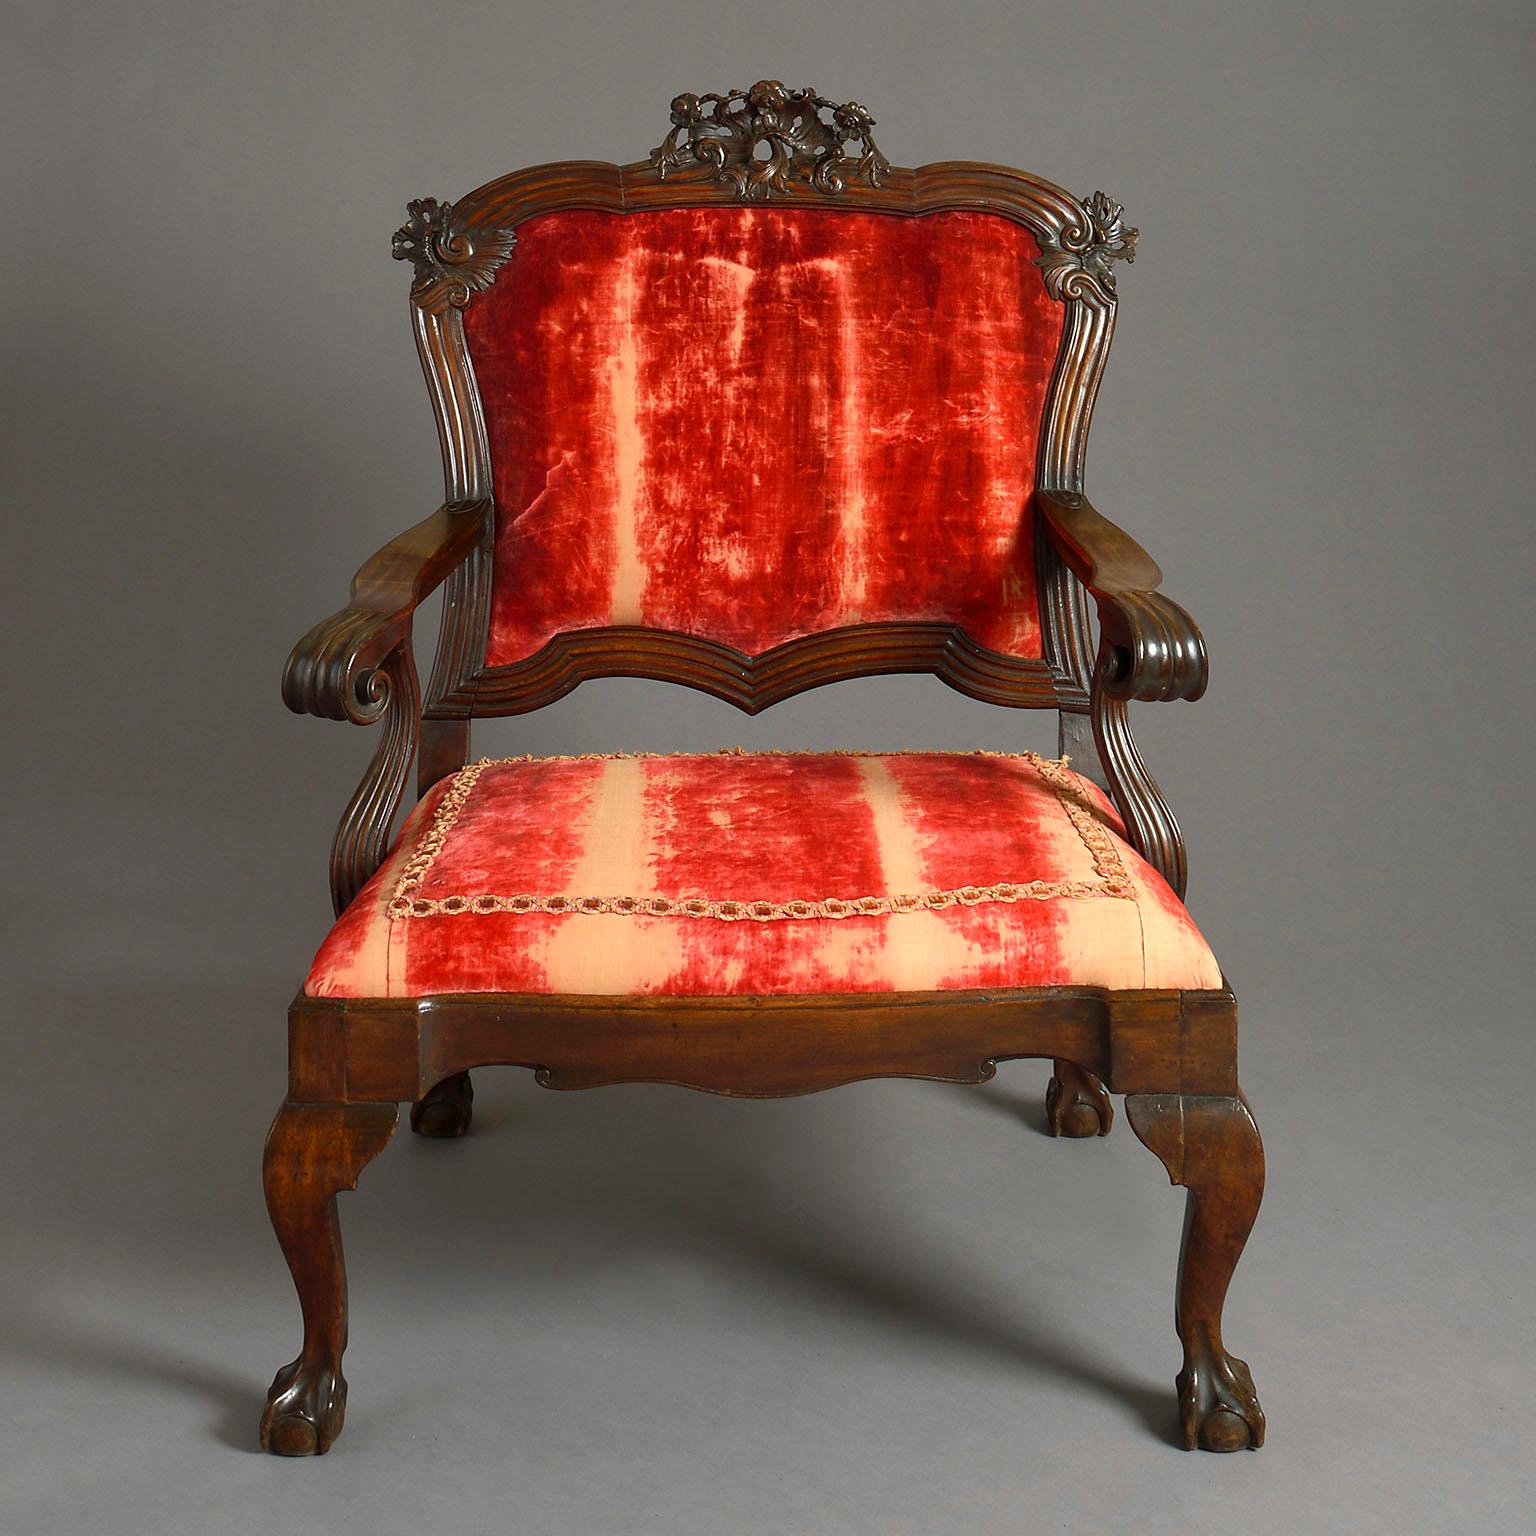 An 18th century Portuguese open armchair of large proportions, the cartouche shaped back with shell carved cresting and moulded frame leading down to the scrolled open arms above the drop-in seat with shaped rails and cabriole legs terminating in